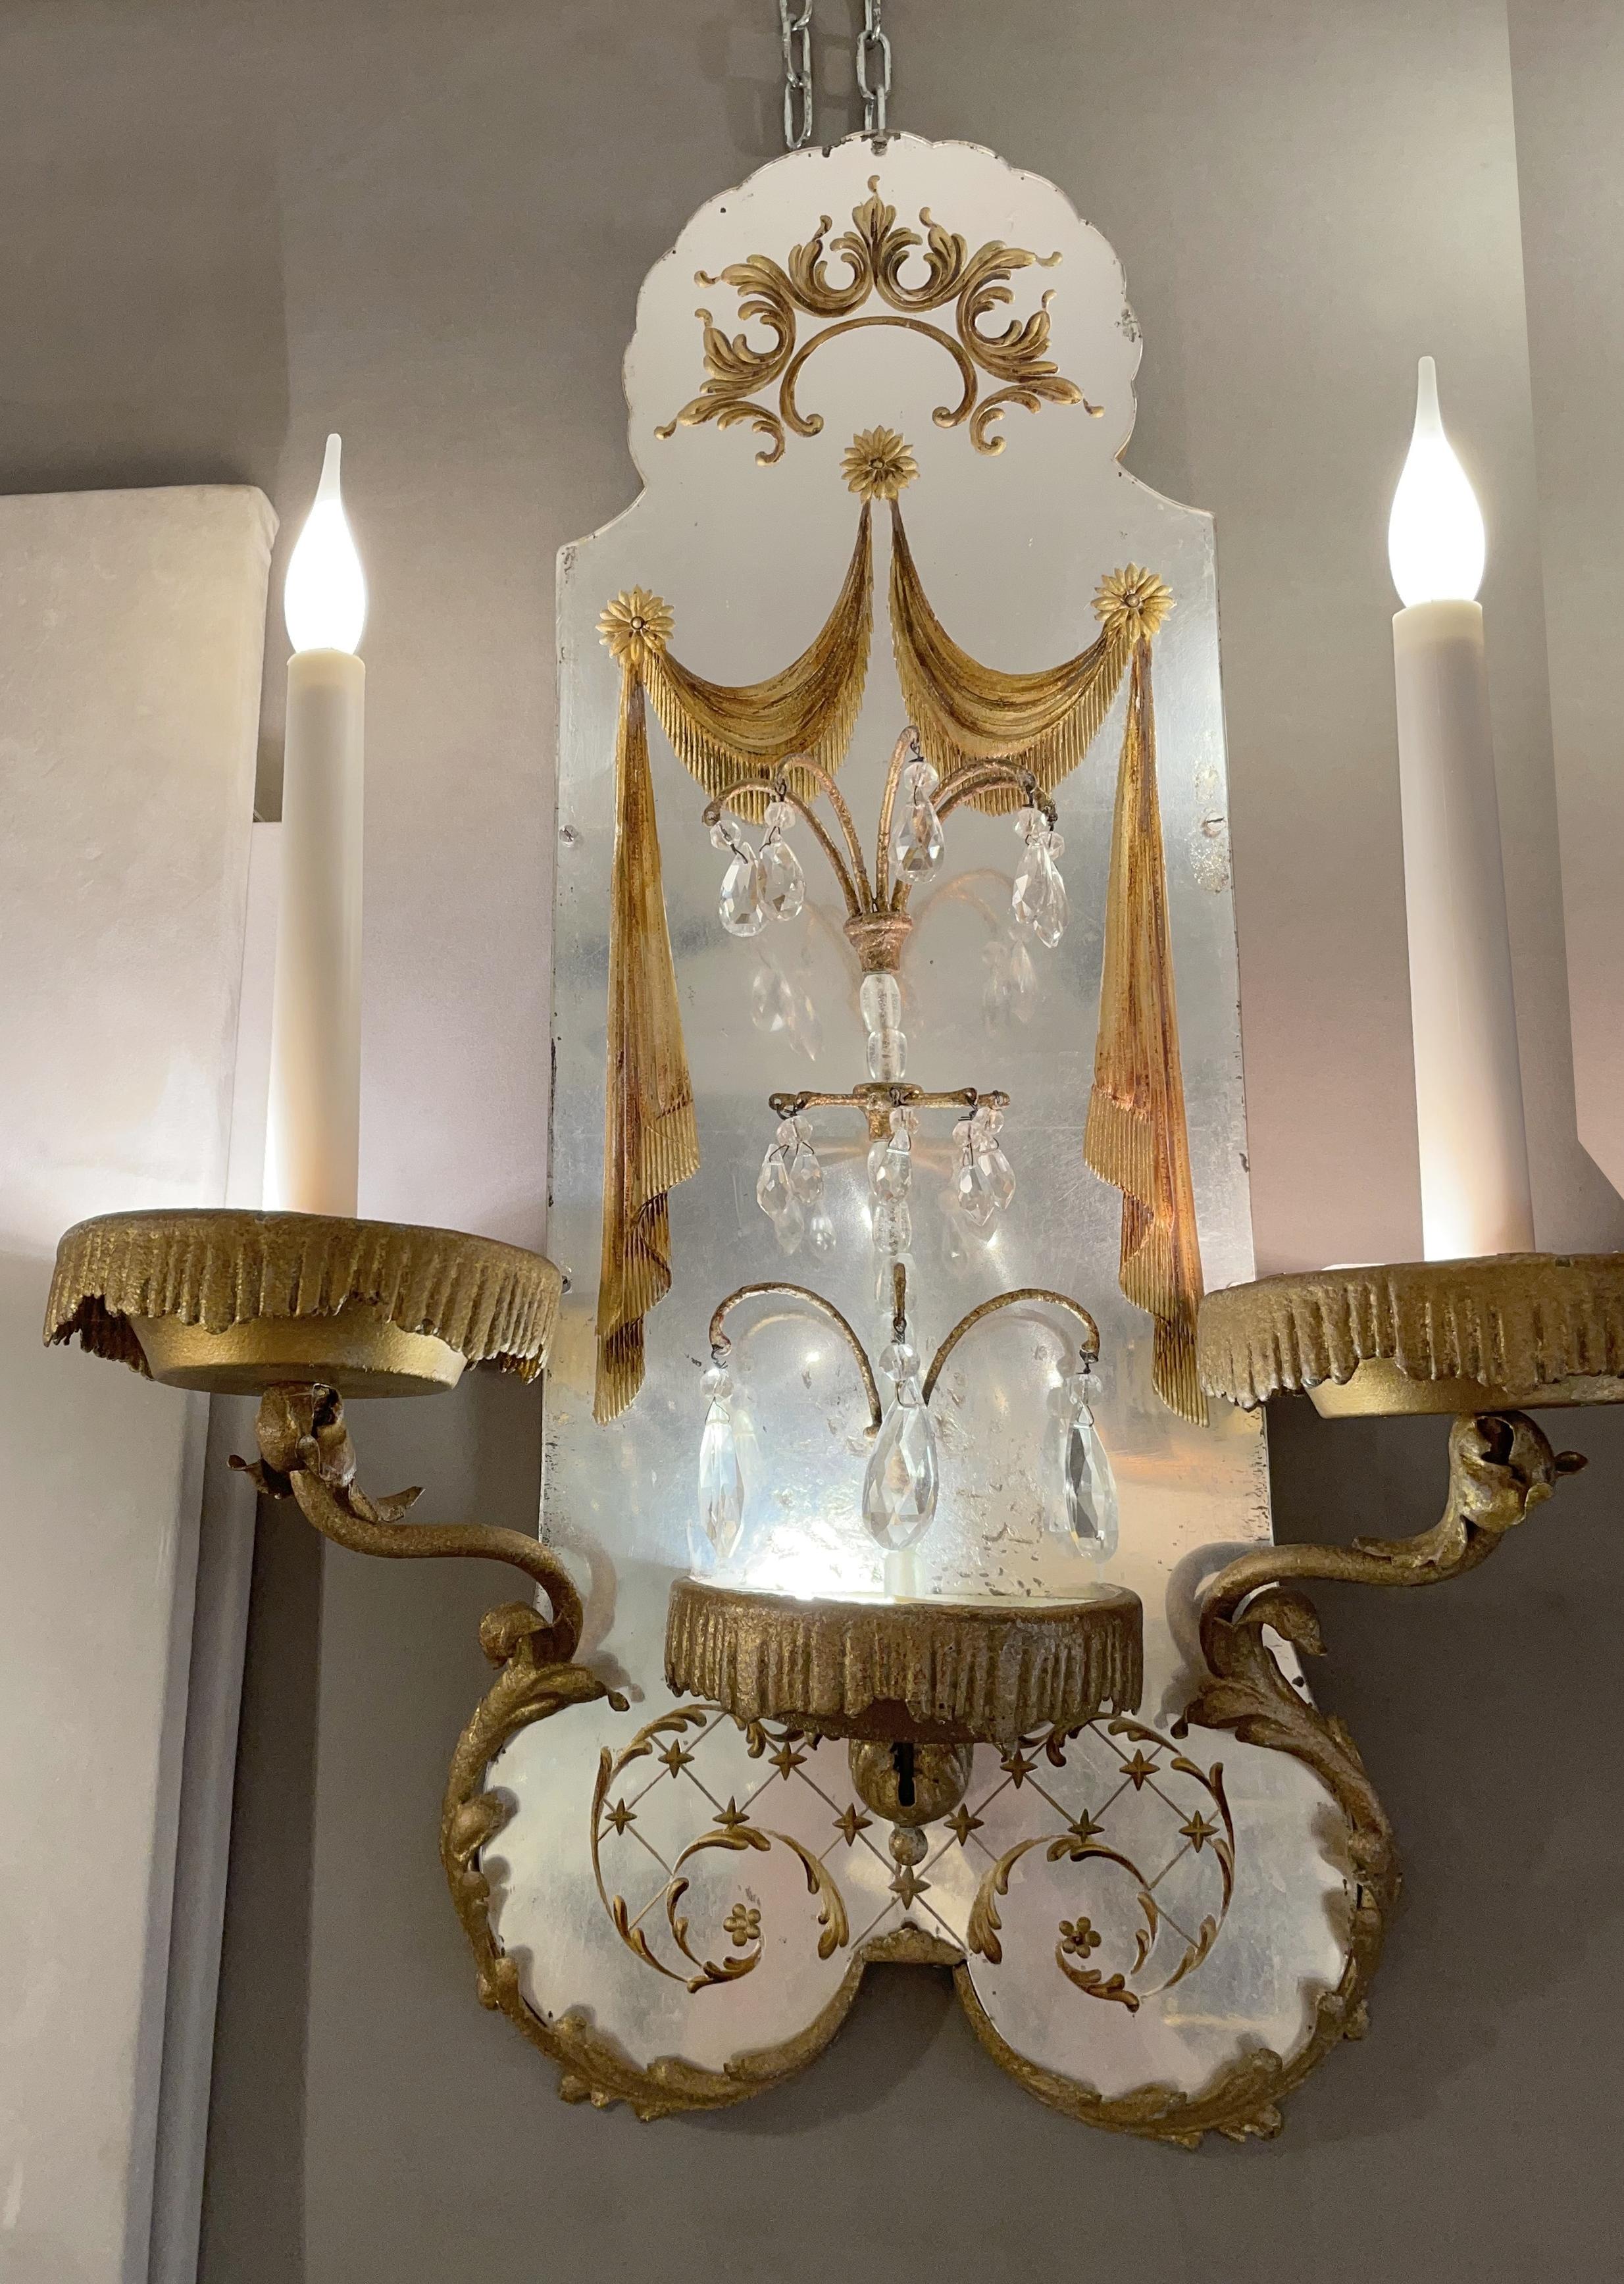 Two wall lights in the style of Maison Baguès made with gilded iron, églomisé plexiglass, and crystal pendants.
For each sconce, the seven lights are located on the two candles and the three bobeches, at the base of each candle and in the central